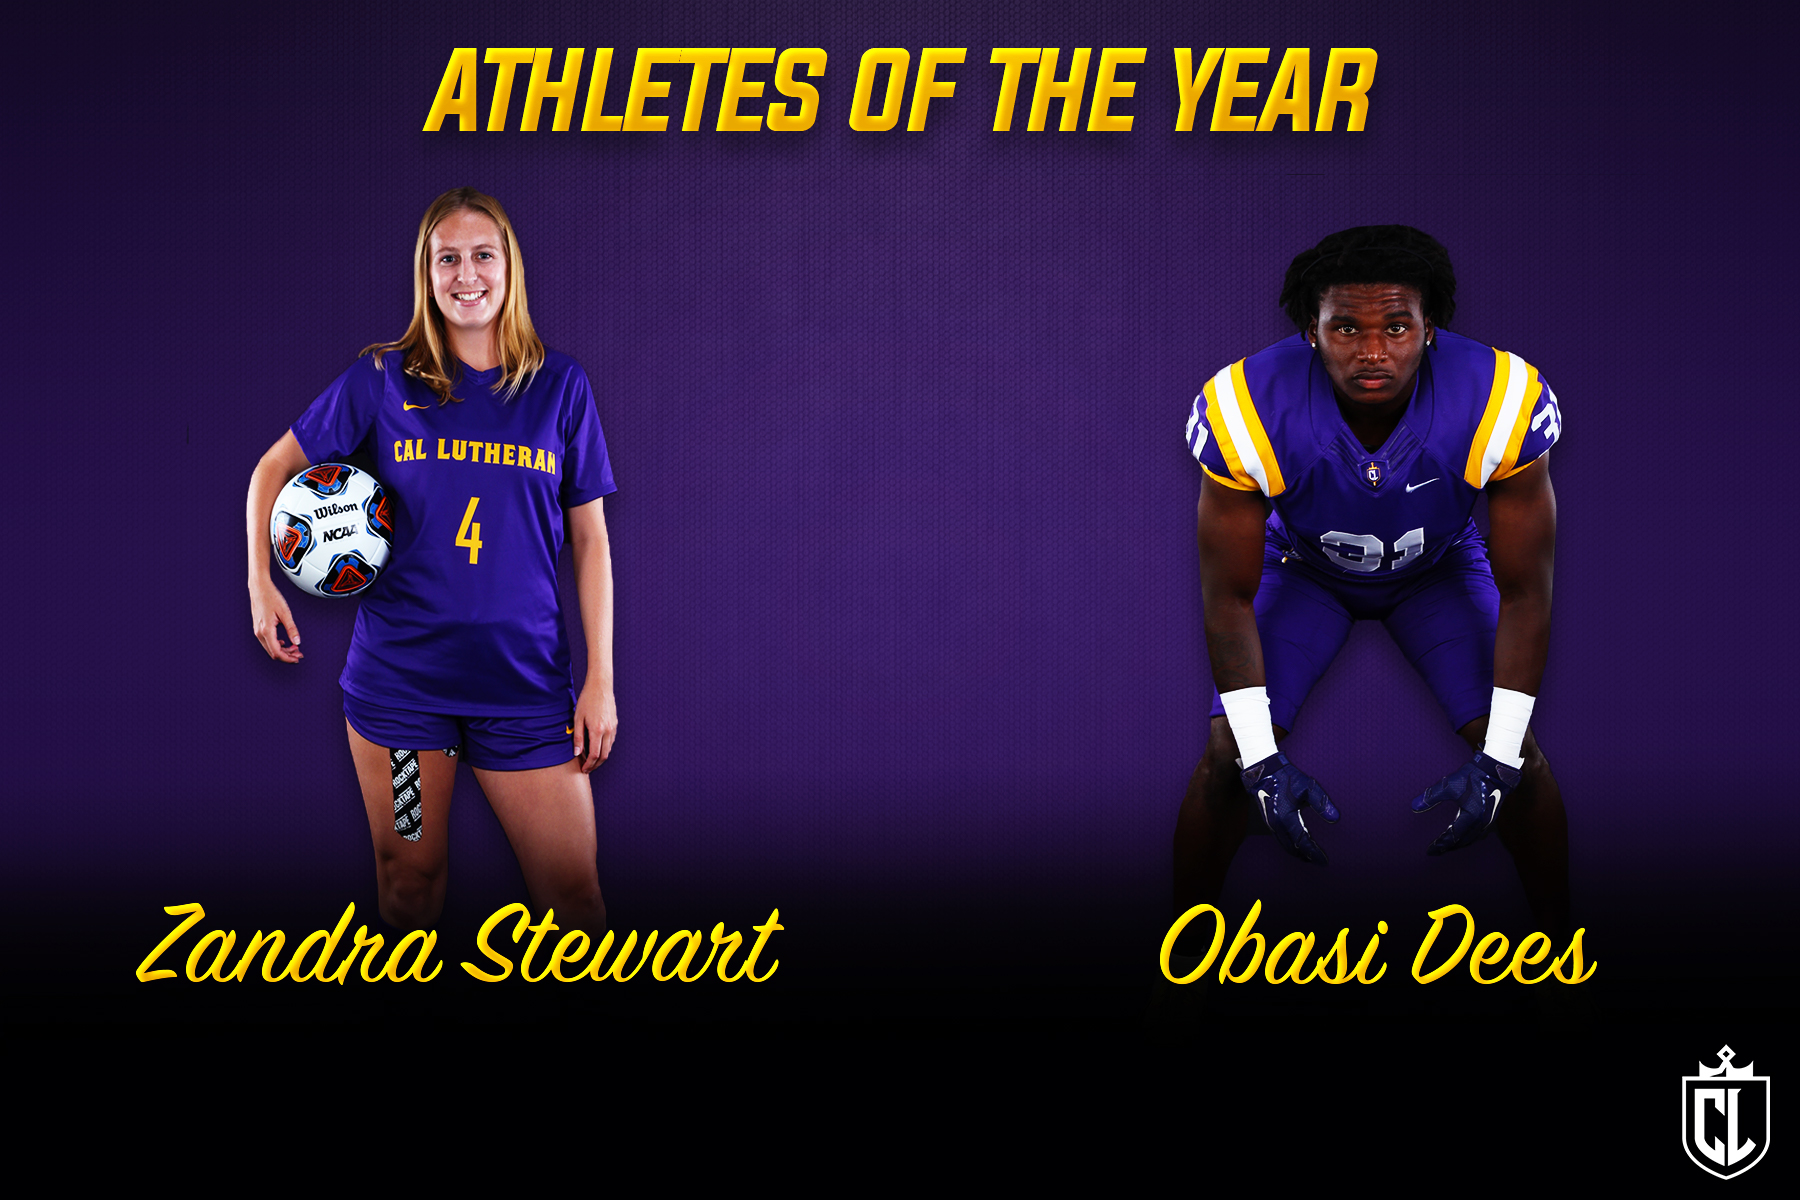 Dees, Stewart Selected Cal Lutheran Male and Female Athlete of the Year